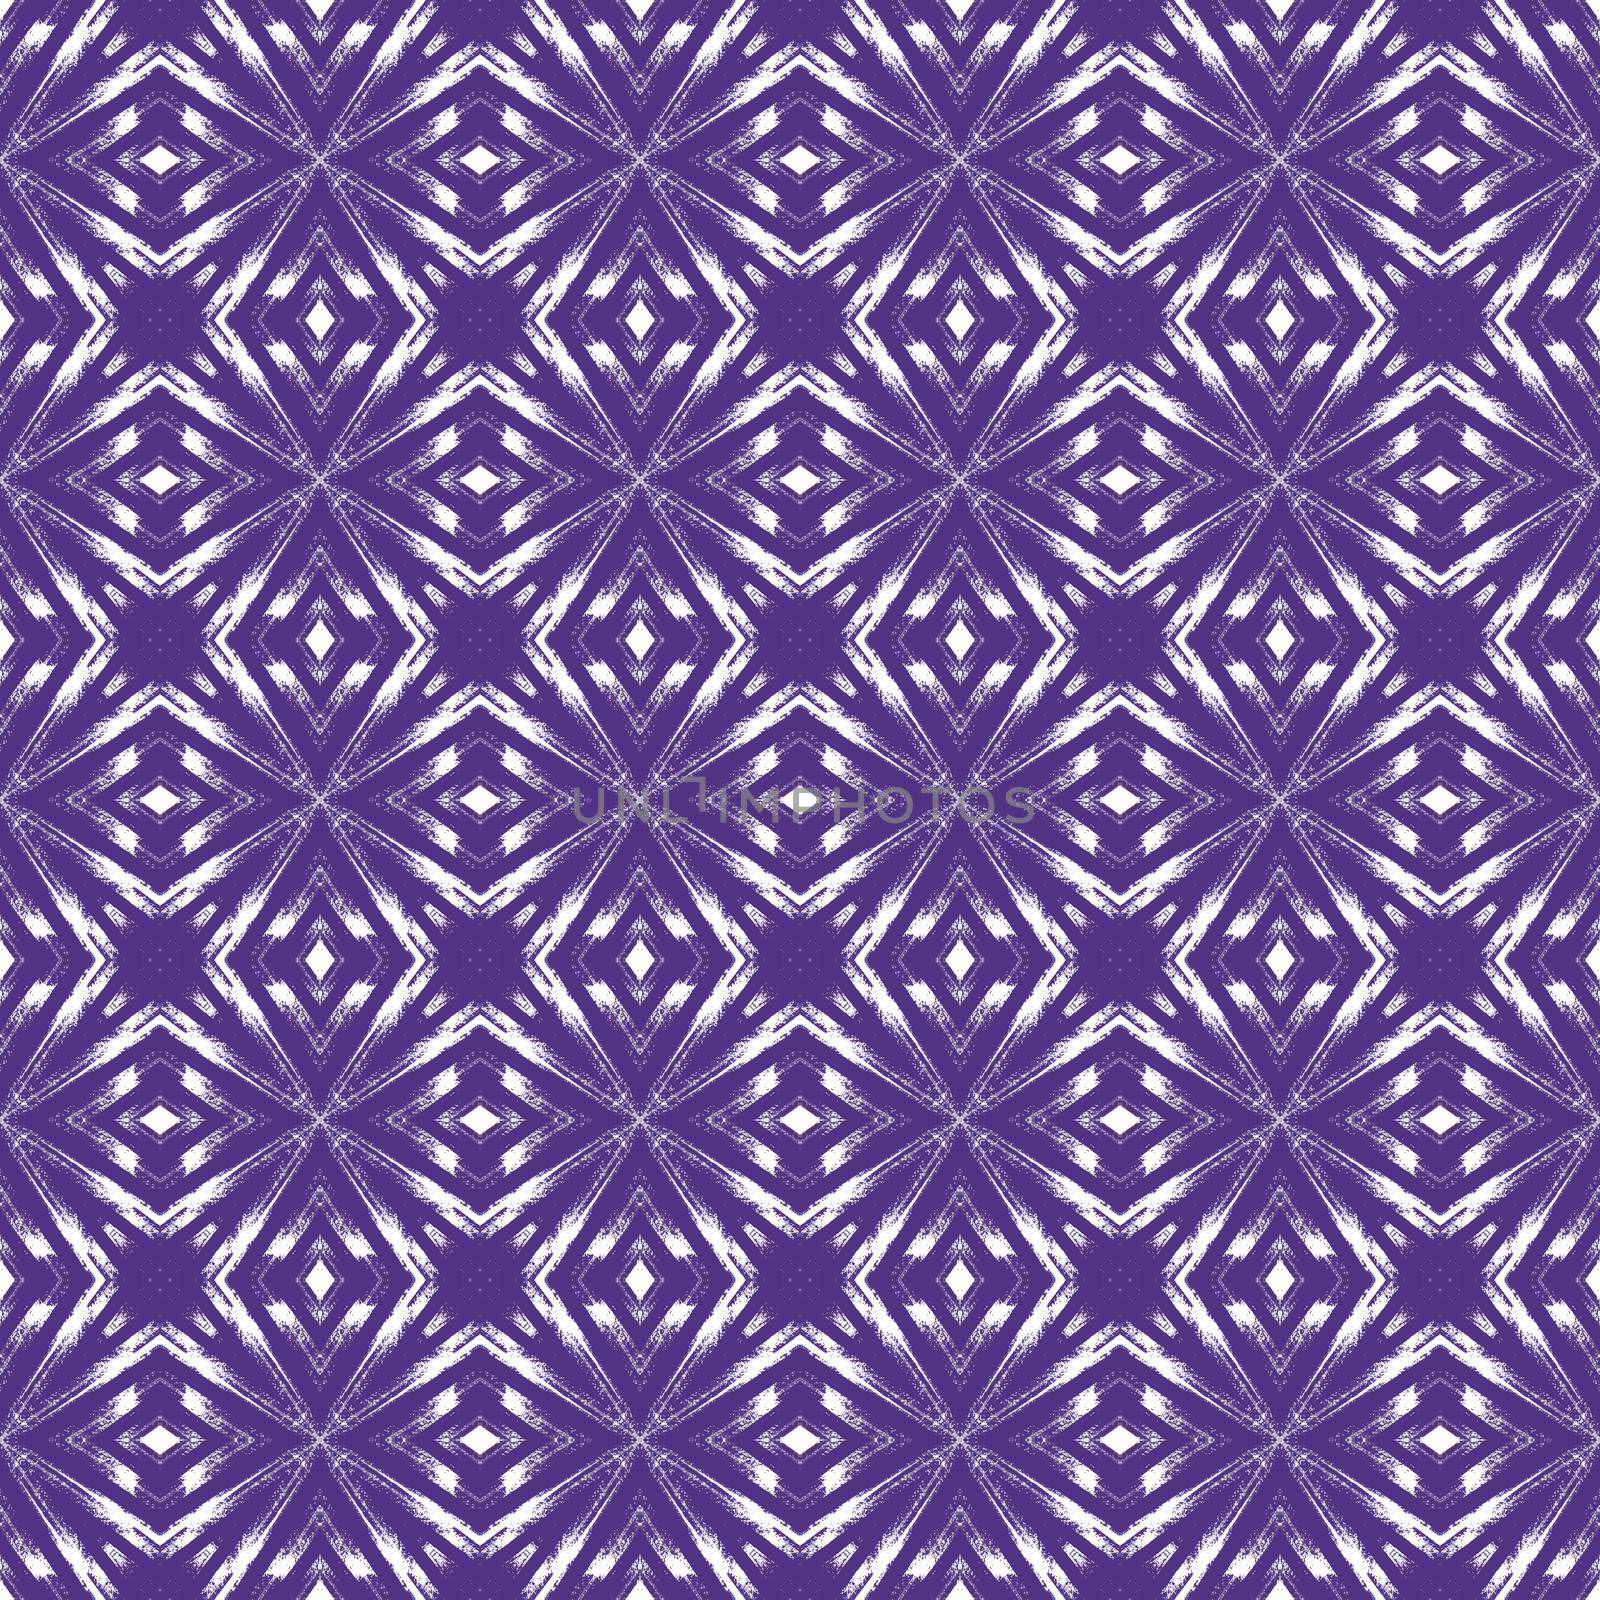 Striped hand drawn pattern. Purple symmetrical kaleidoscope background. Repeating striped hand drawn tile. Textile ready surprising print, swimwear fabric, wallpaper, wrapping.